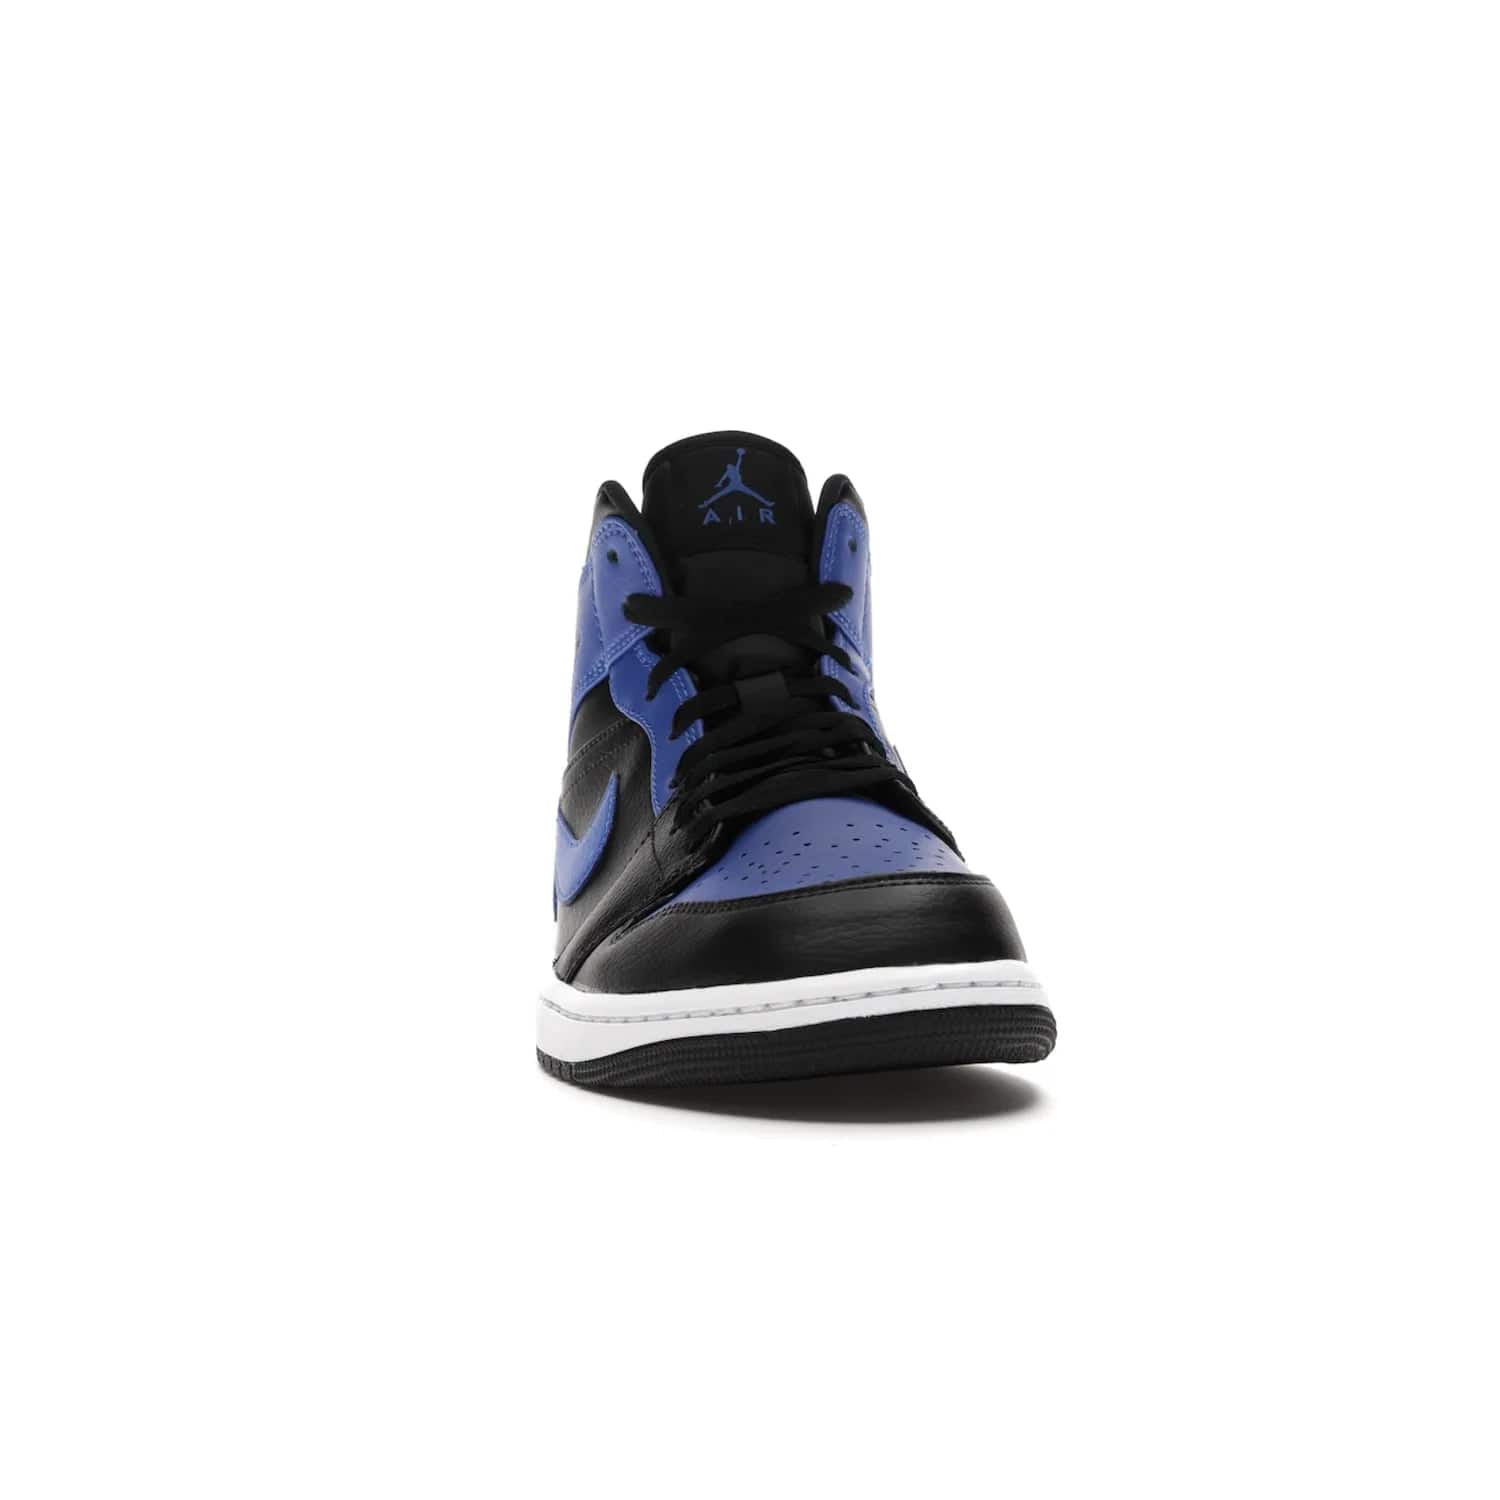 Jordan 1 Mid Hyper Royal Tumbled Leather - Image 9 - Only at www.BallersClubKickz.com - Iconic colorway of the Air Jordan 1 Mid Black Royal Tumbled Leather. Features a black tumbled leather upper, royal blue leather overlays, white midsole & black rubber outsole. Released December 2020. Adds premium style to any collection.